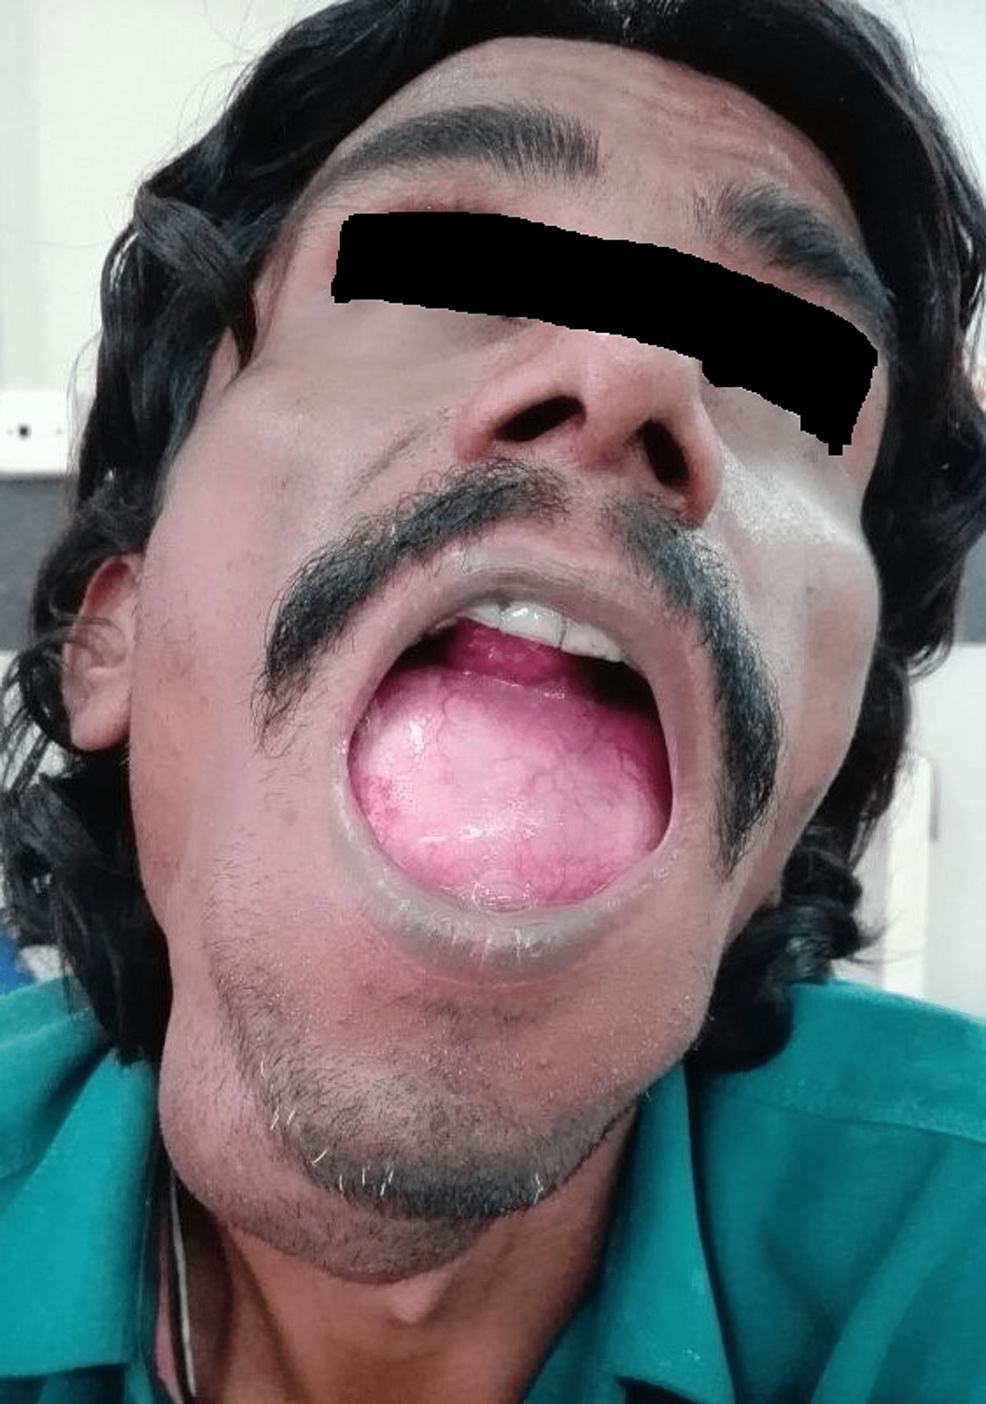 Cureus An Unusual Case Of Sublingual Epidermoid Cyst Mimicking Plunging Ranula